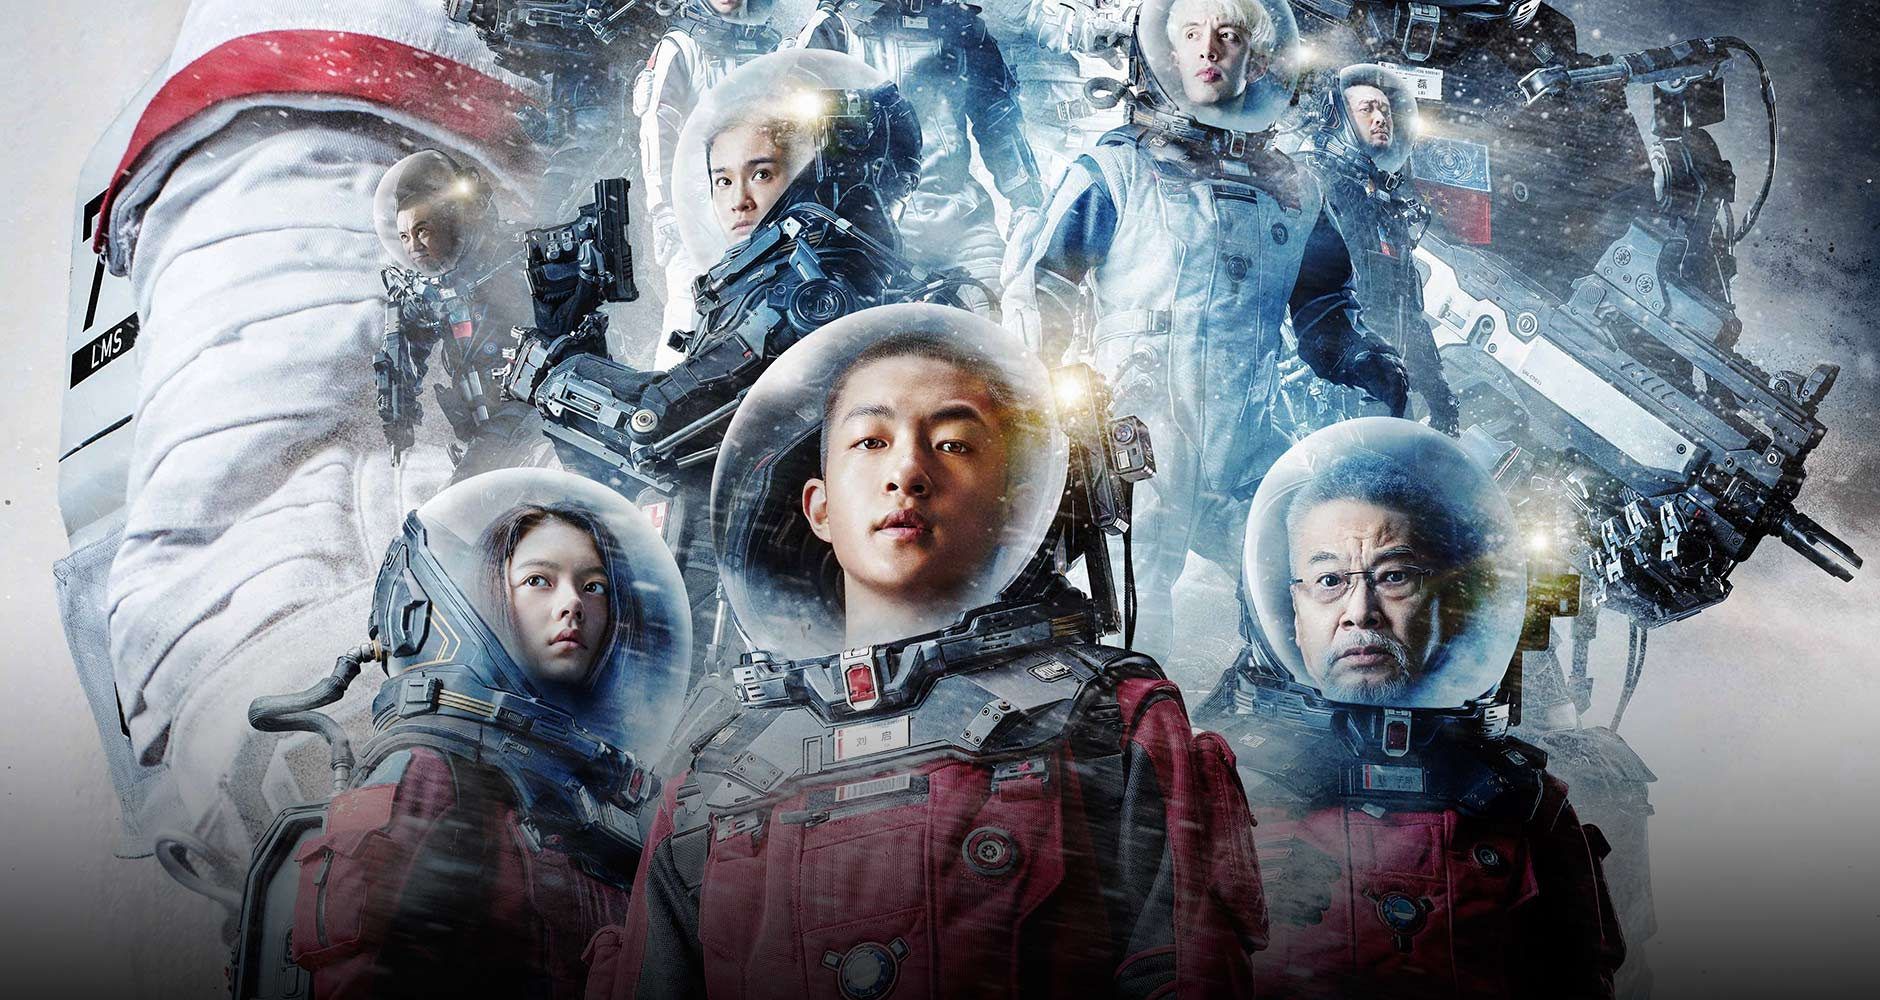 The Wandering Earth Review: Chinese Blockbuster Crash Lands On Netflix